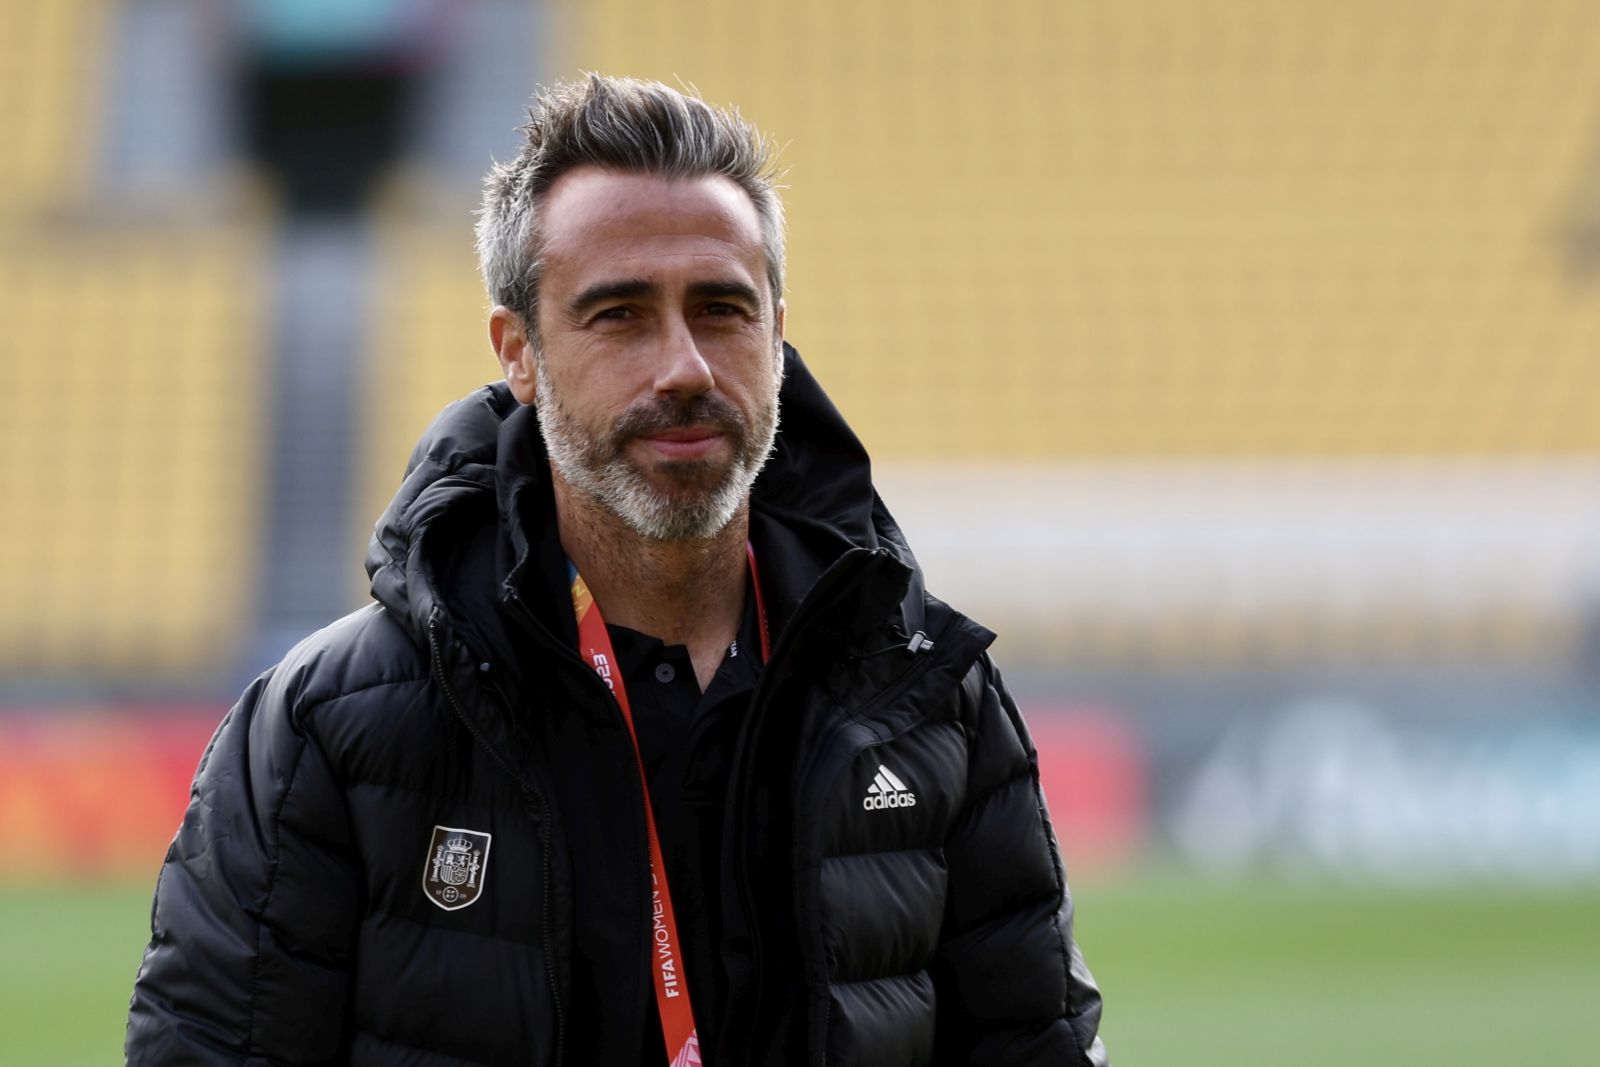 epa10842145 (FILE) - Spanish team coach Jorge Vilda inspects the pitcch ahead of the FIFA Women's World Cup at the Wellington Regional Stadium in Wellington, New Zealand, 20 July 2023 (reissued 05 September 2023). Spanish football federation RFEF has dismissed Jorge Vilda as the women's national team's head coach and technical director, according to a statement by the RFEF published on 05 September 2023.  EPA/RITCHIE B. TONGO